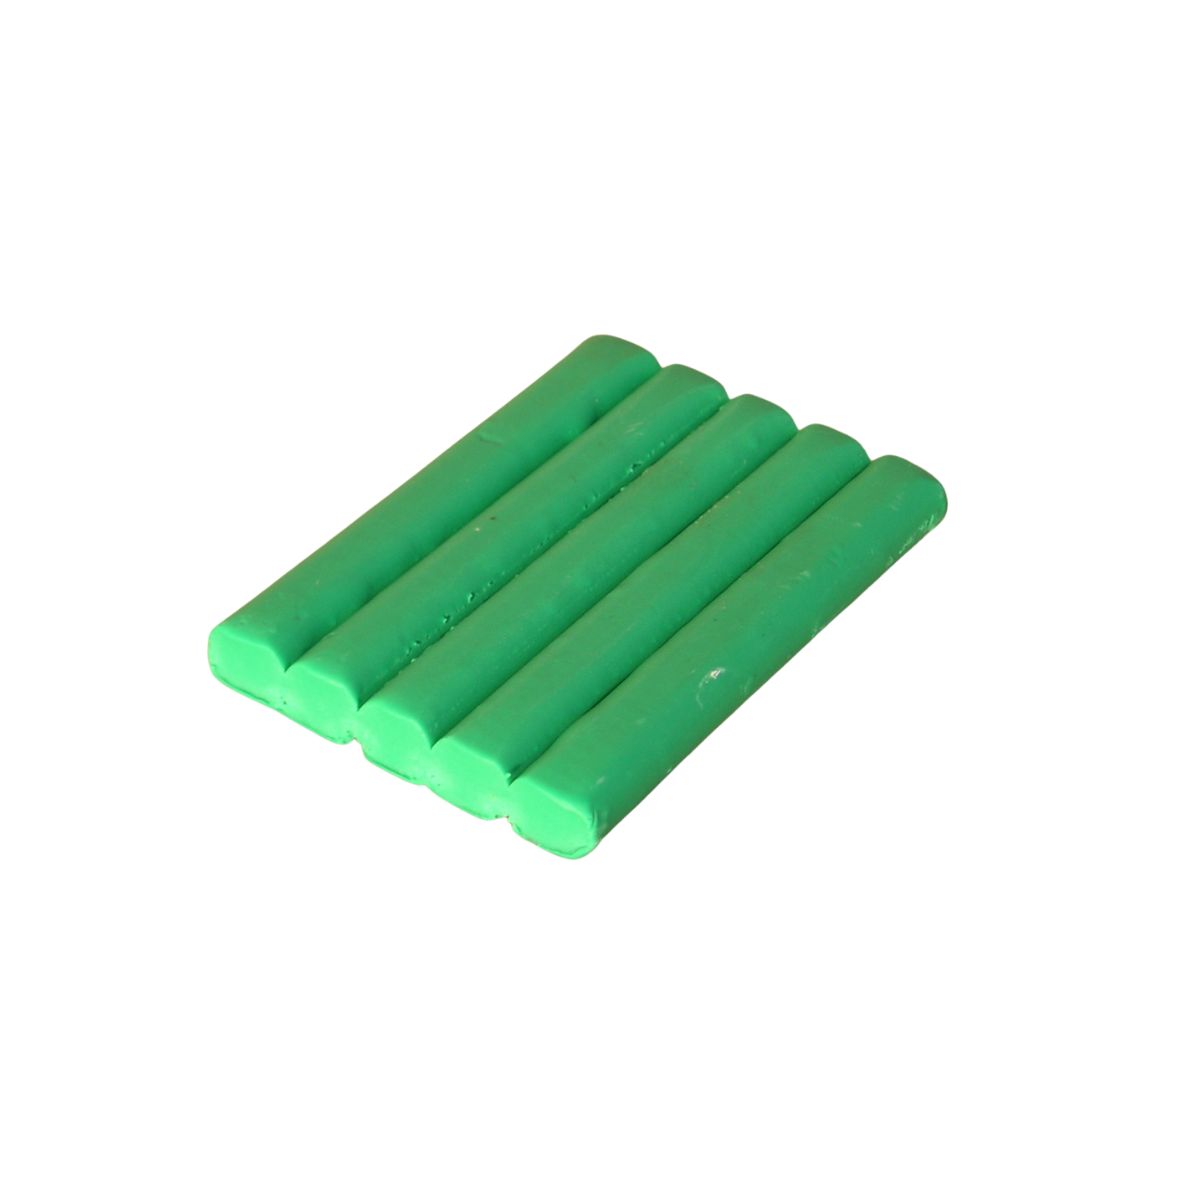 Plasticine for new take-off boards - Marty sports